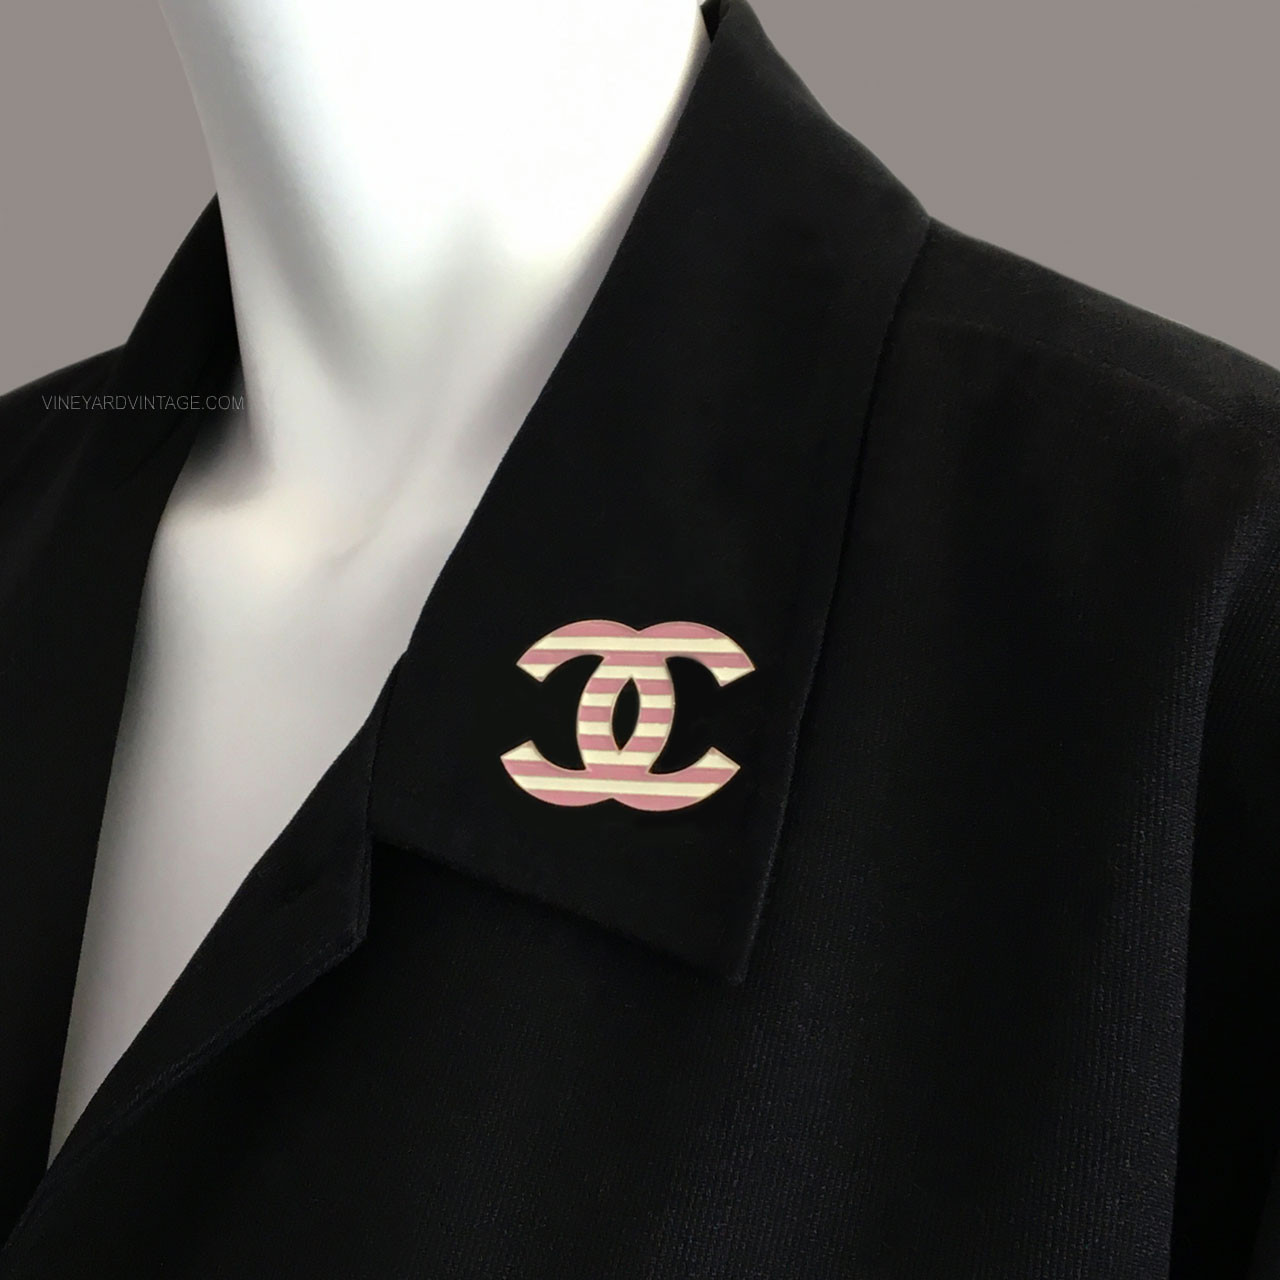 chanel pins for women clothes